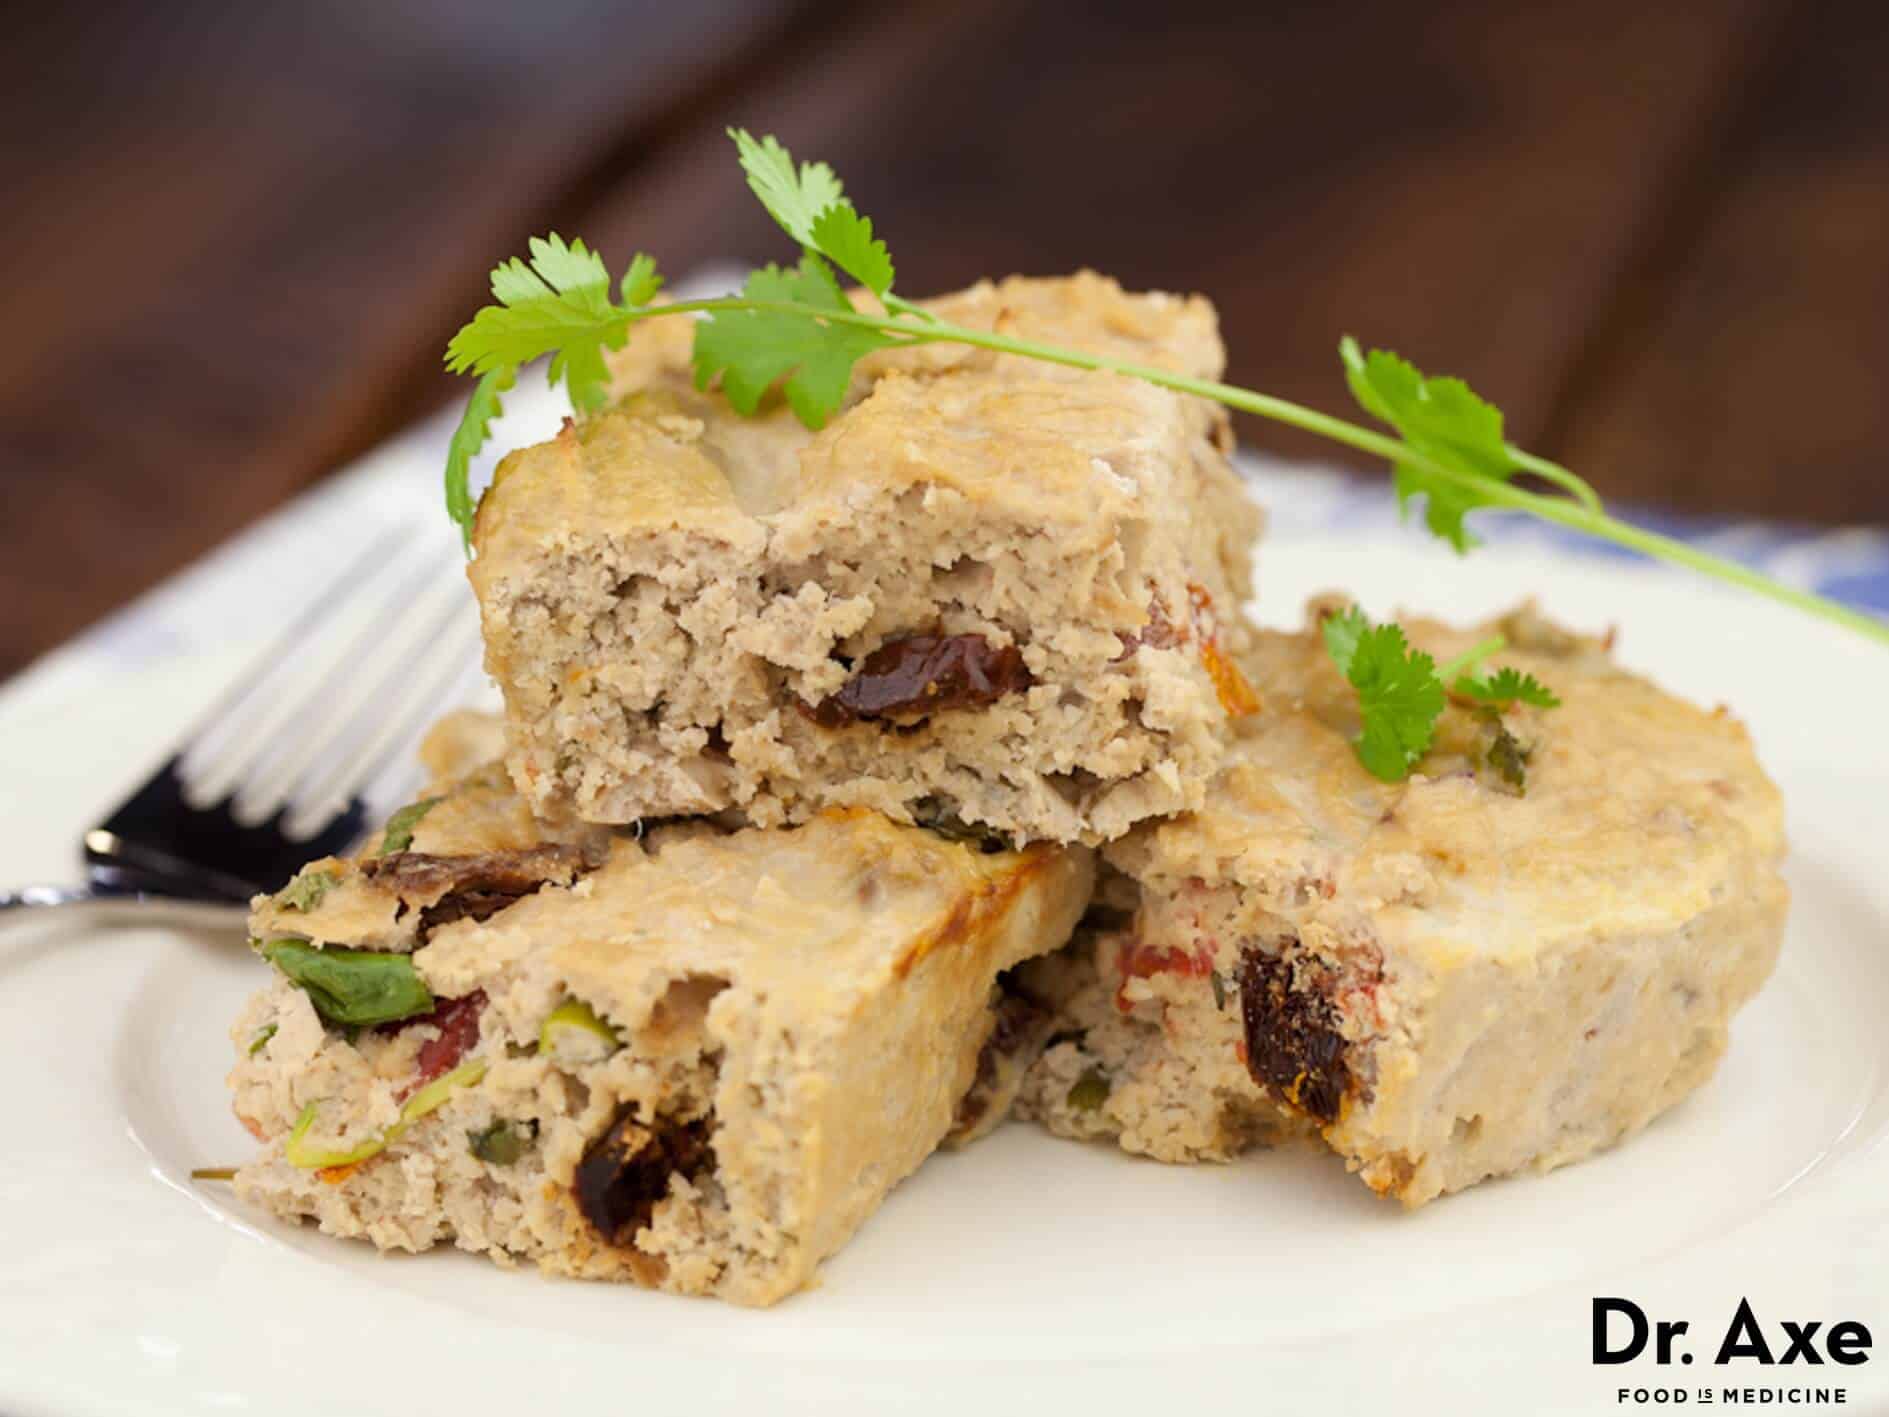 Turkey meatloaf recipe with goat cheese and sun-dried tomatoes - Dr. Axe